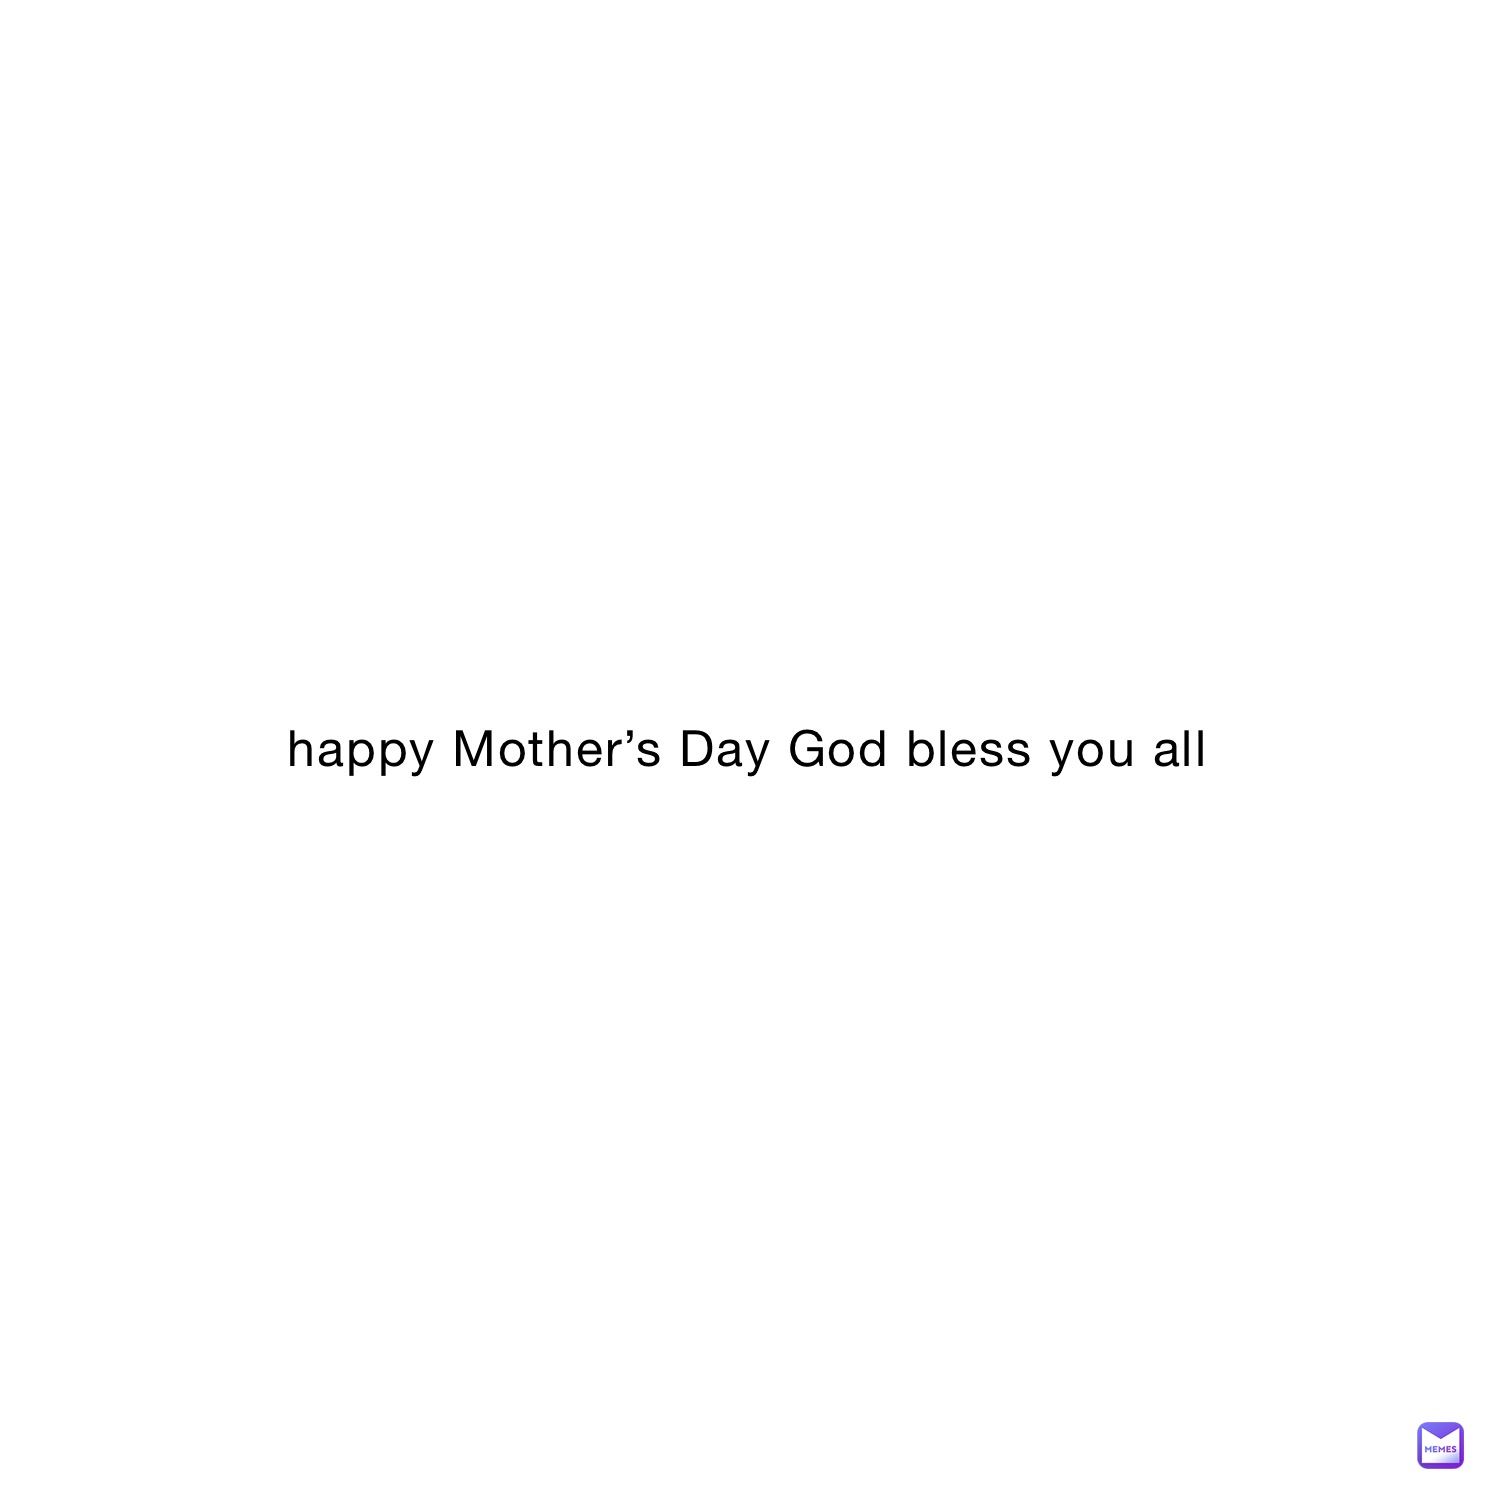 happy Mother’s Day God bless you all